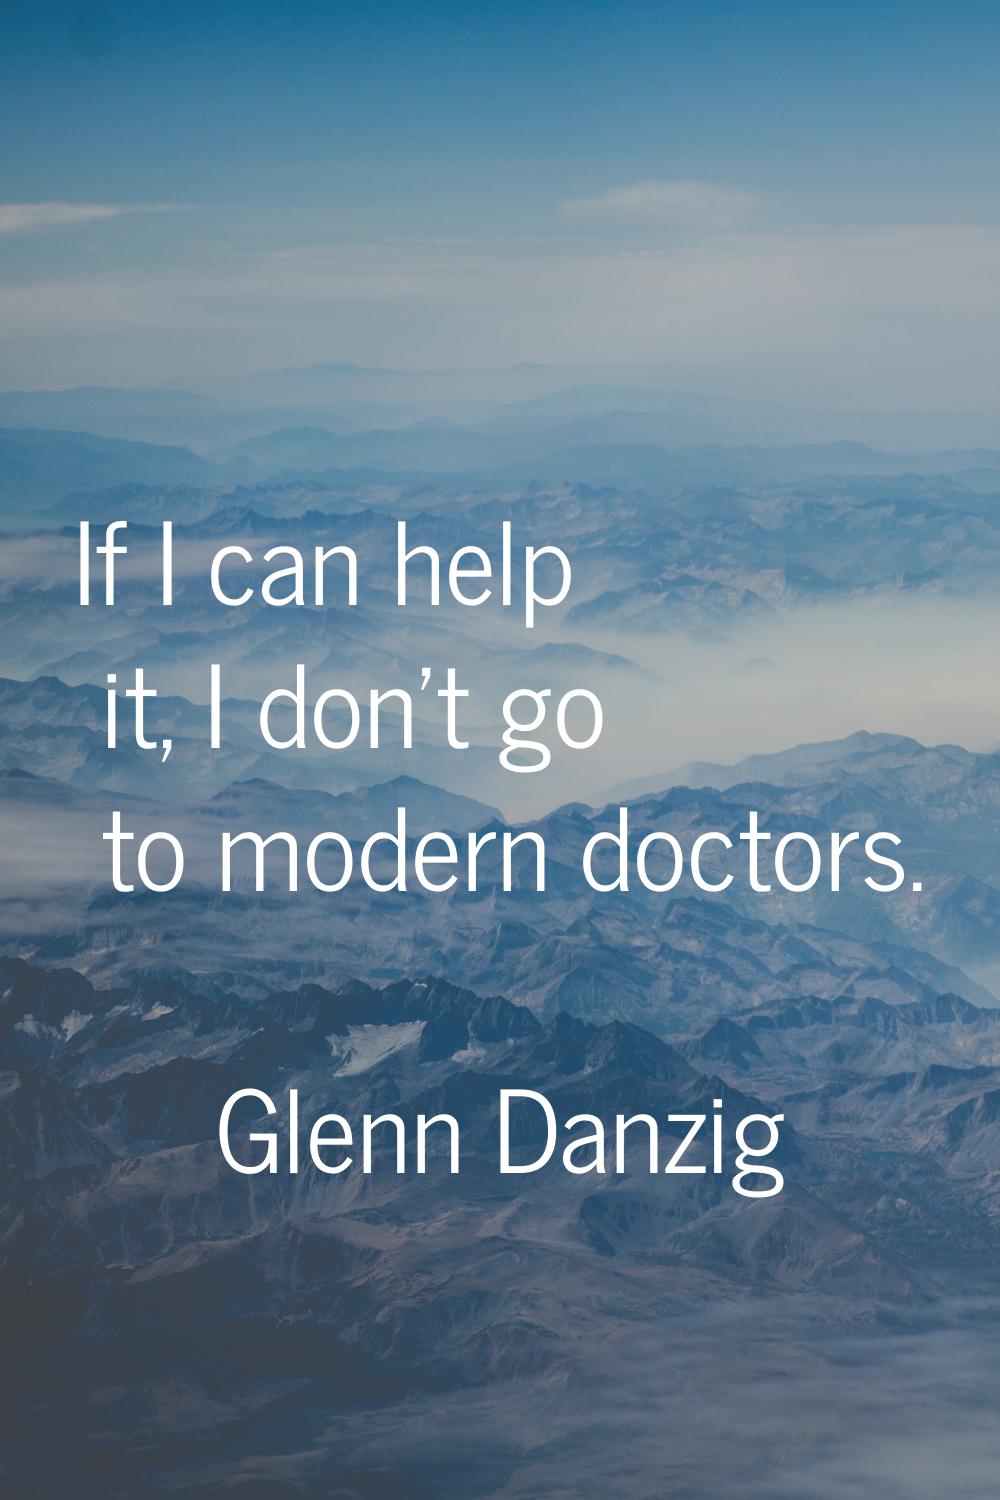 If I can help it, I don't go to modern doctors.